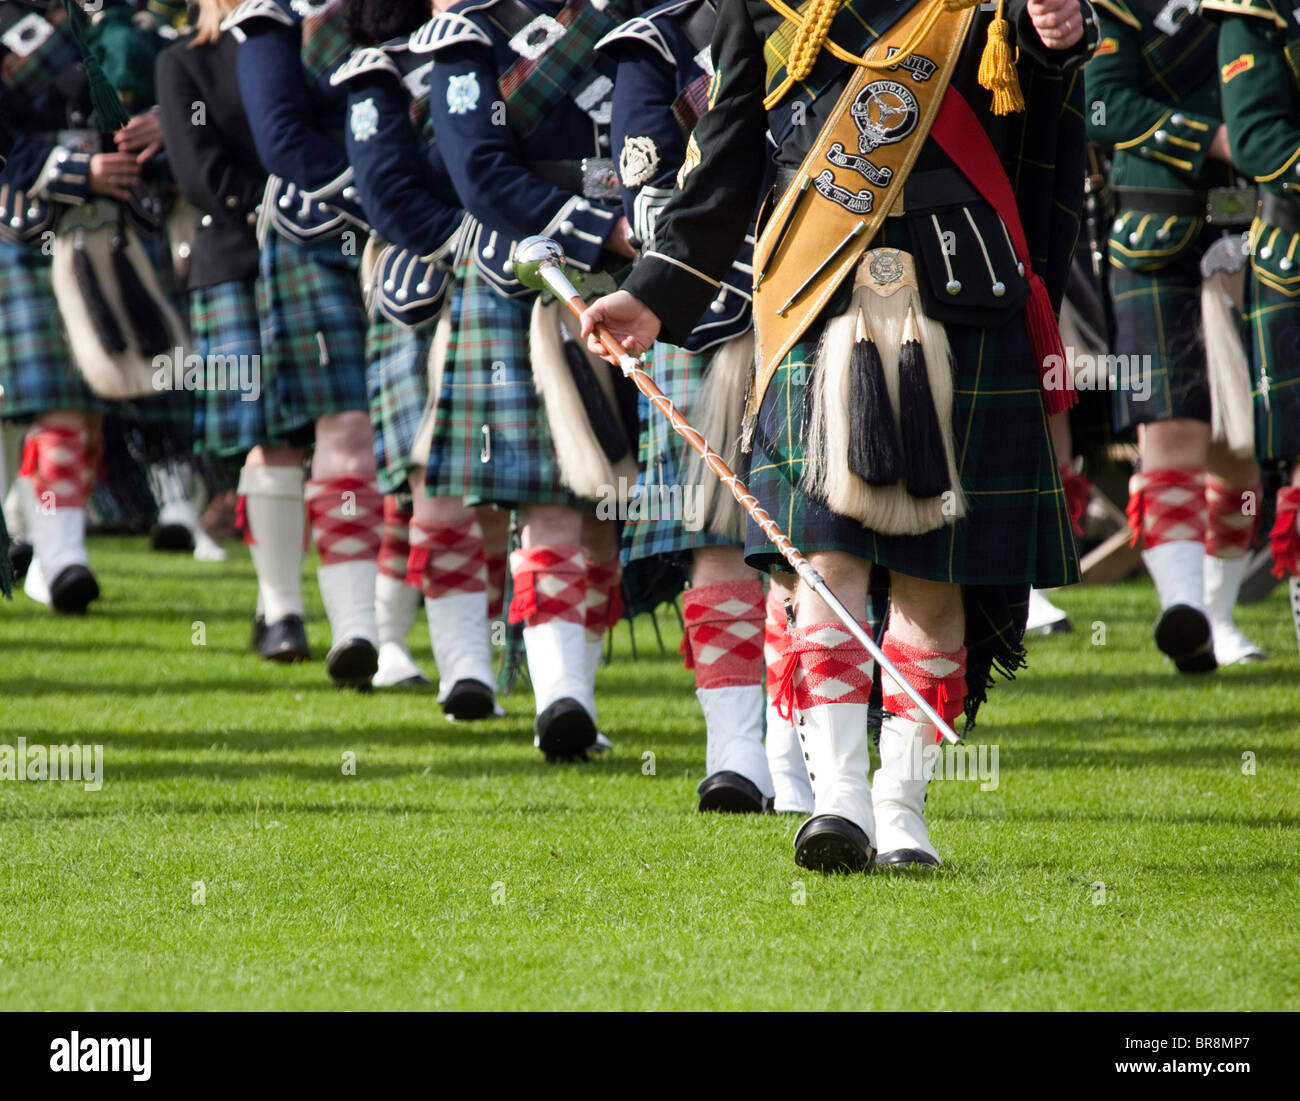 Drum Major leading a Scottish Pipe Band Stock Photo